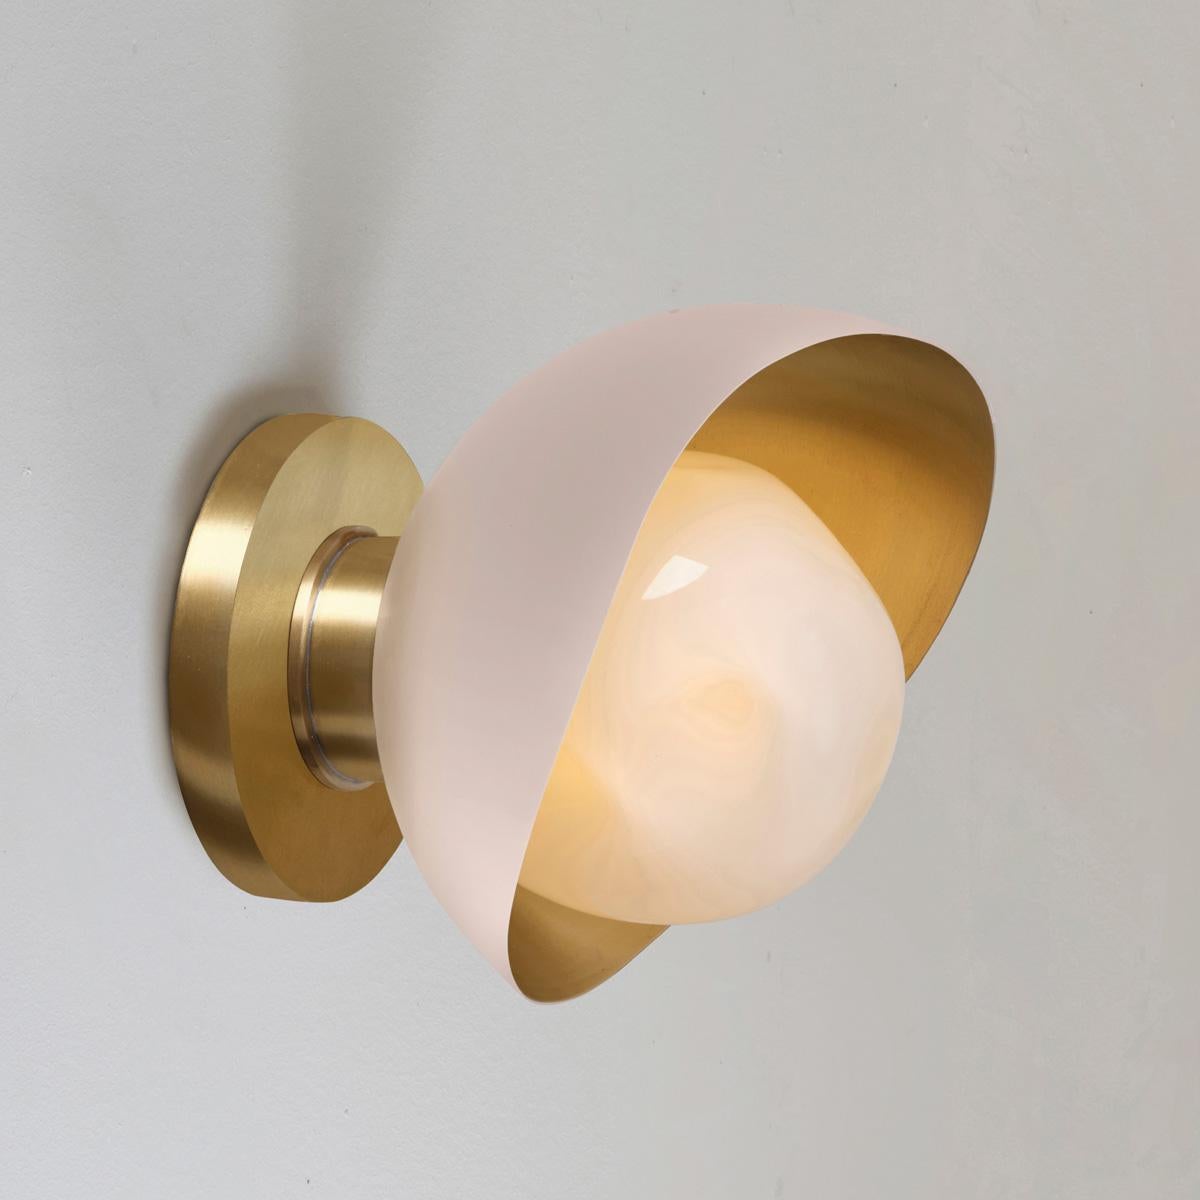 Perla Mini Wall Light by Gaspare Asaro. Black and Polished Brass Finish For Sale 3